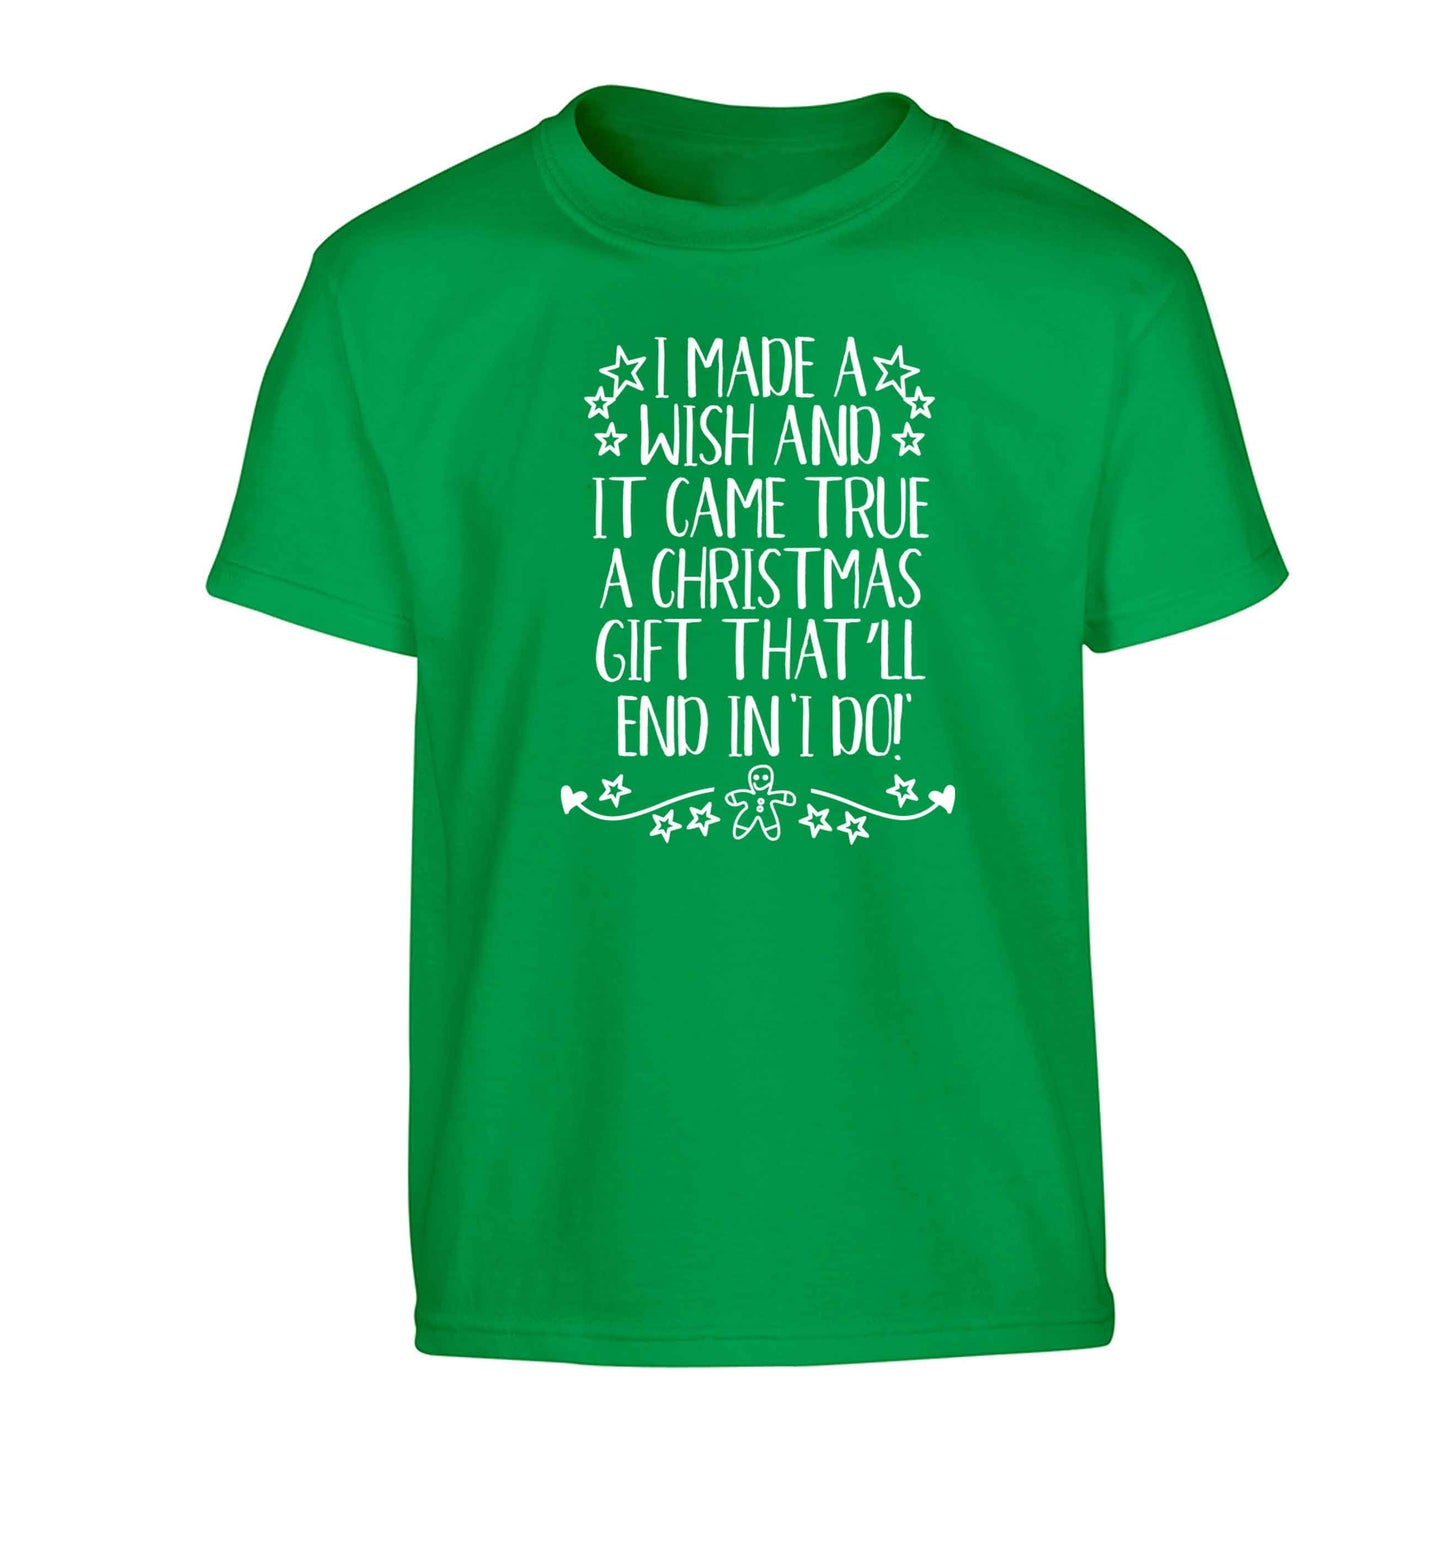 I made a wish and it came true a Christmas gift that'll end in 'I do' Children's green Tshirt 12-13 Years